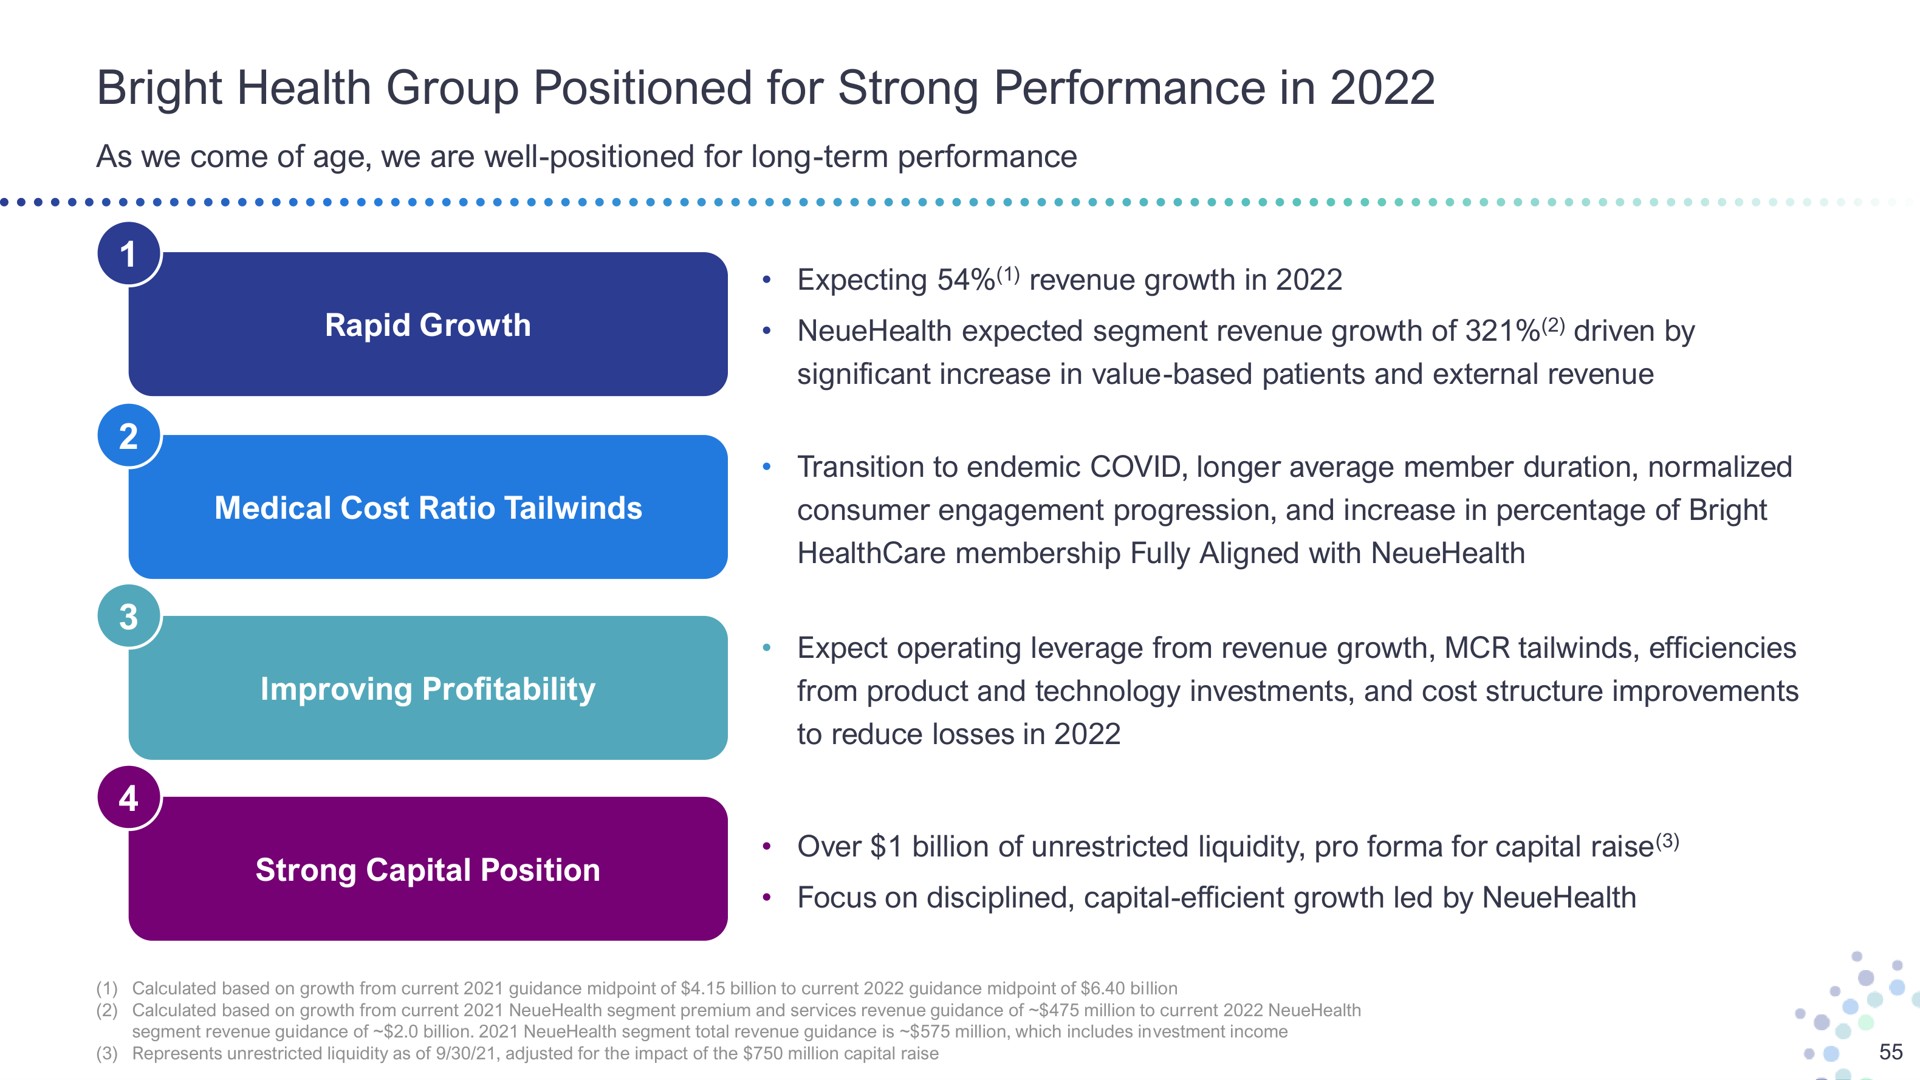 bright health group positioned for strong performance in as we come of age we are well positioned long term rapid growth expecting revenue growth expected segment revenue growth of driven by significant increase value based patients and external revenue medical cost ratio consumer engagement progression and increase percentage of transition to endemic covid longer average member duration normalized membership fully aligned with improving profitability from product and technology investments and cost structure improvements expect operating leverage from revenue growth efficiencies capital position to reduce losses over billion of unrestricted liquidity pro capital raise focus on disciplined capital efficient growth led by | Bright Health Group